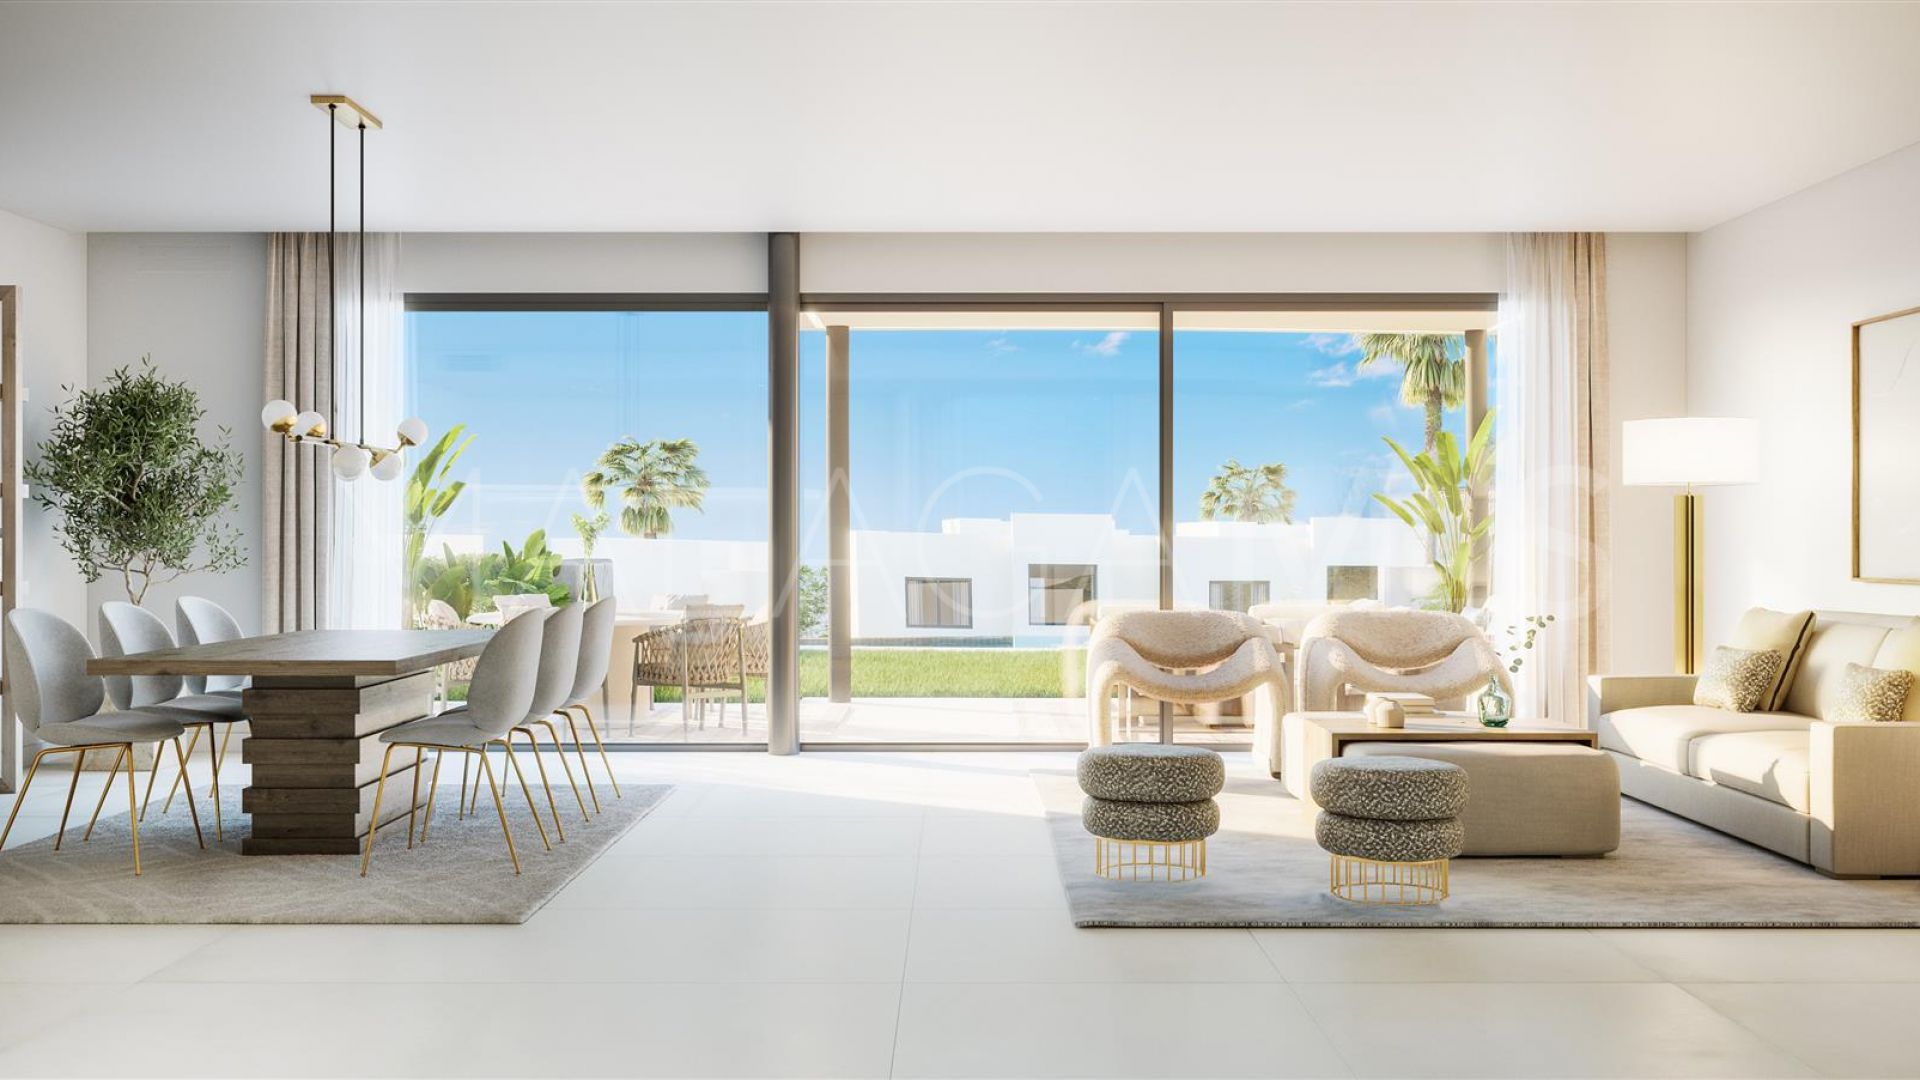 Einfamilienhaushälfte for sale in Marbella Ost